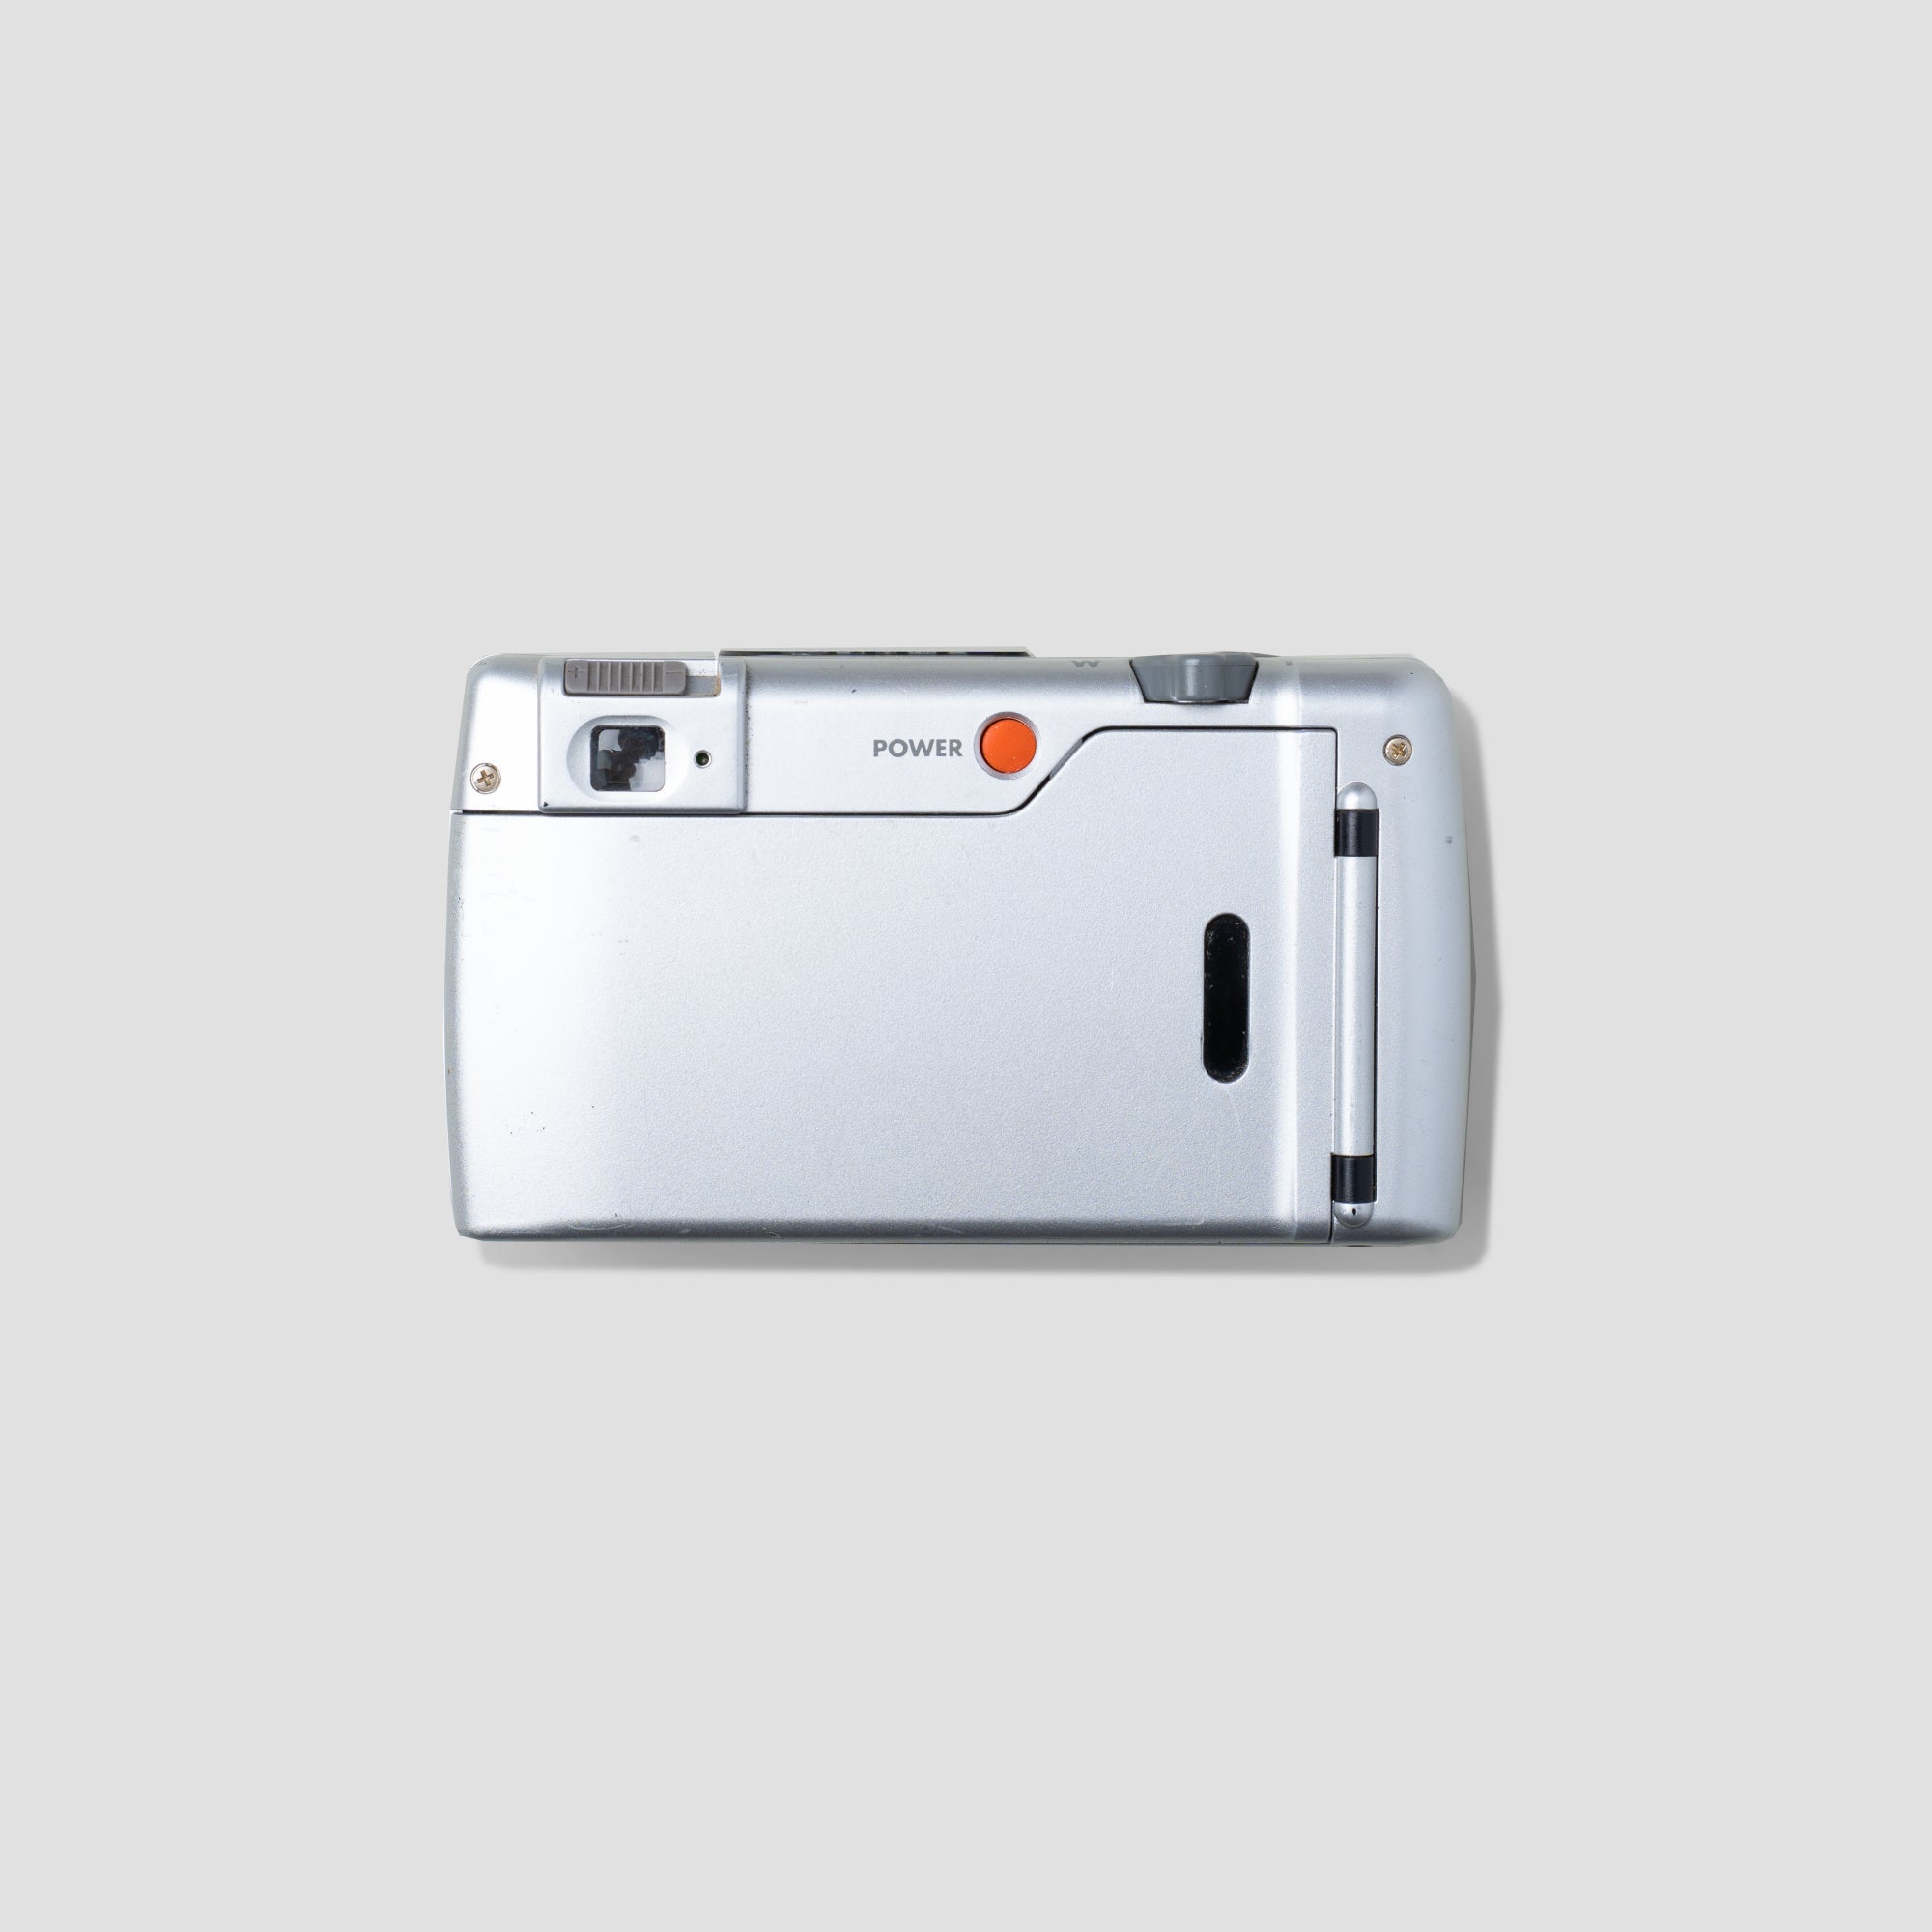 Buy Konica Z-up 115e now at Analogue Amsterdam